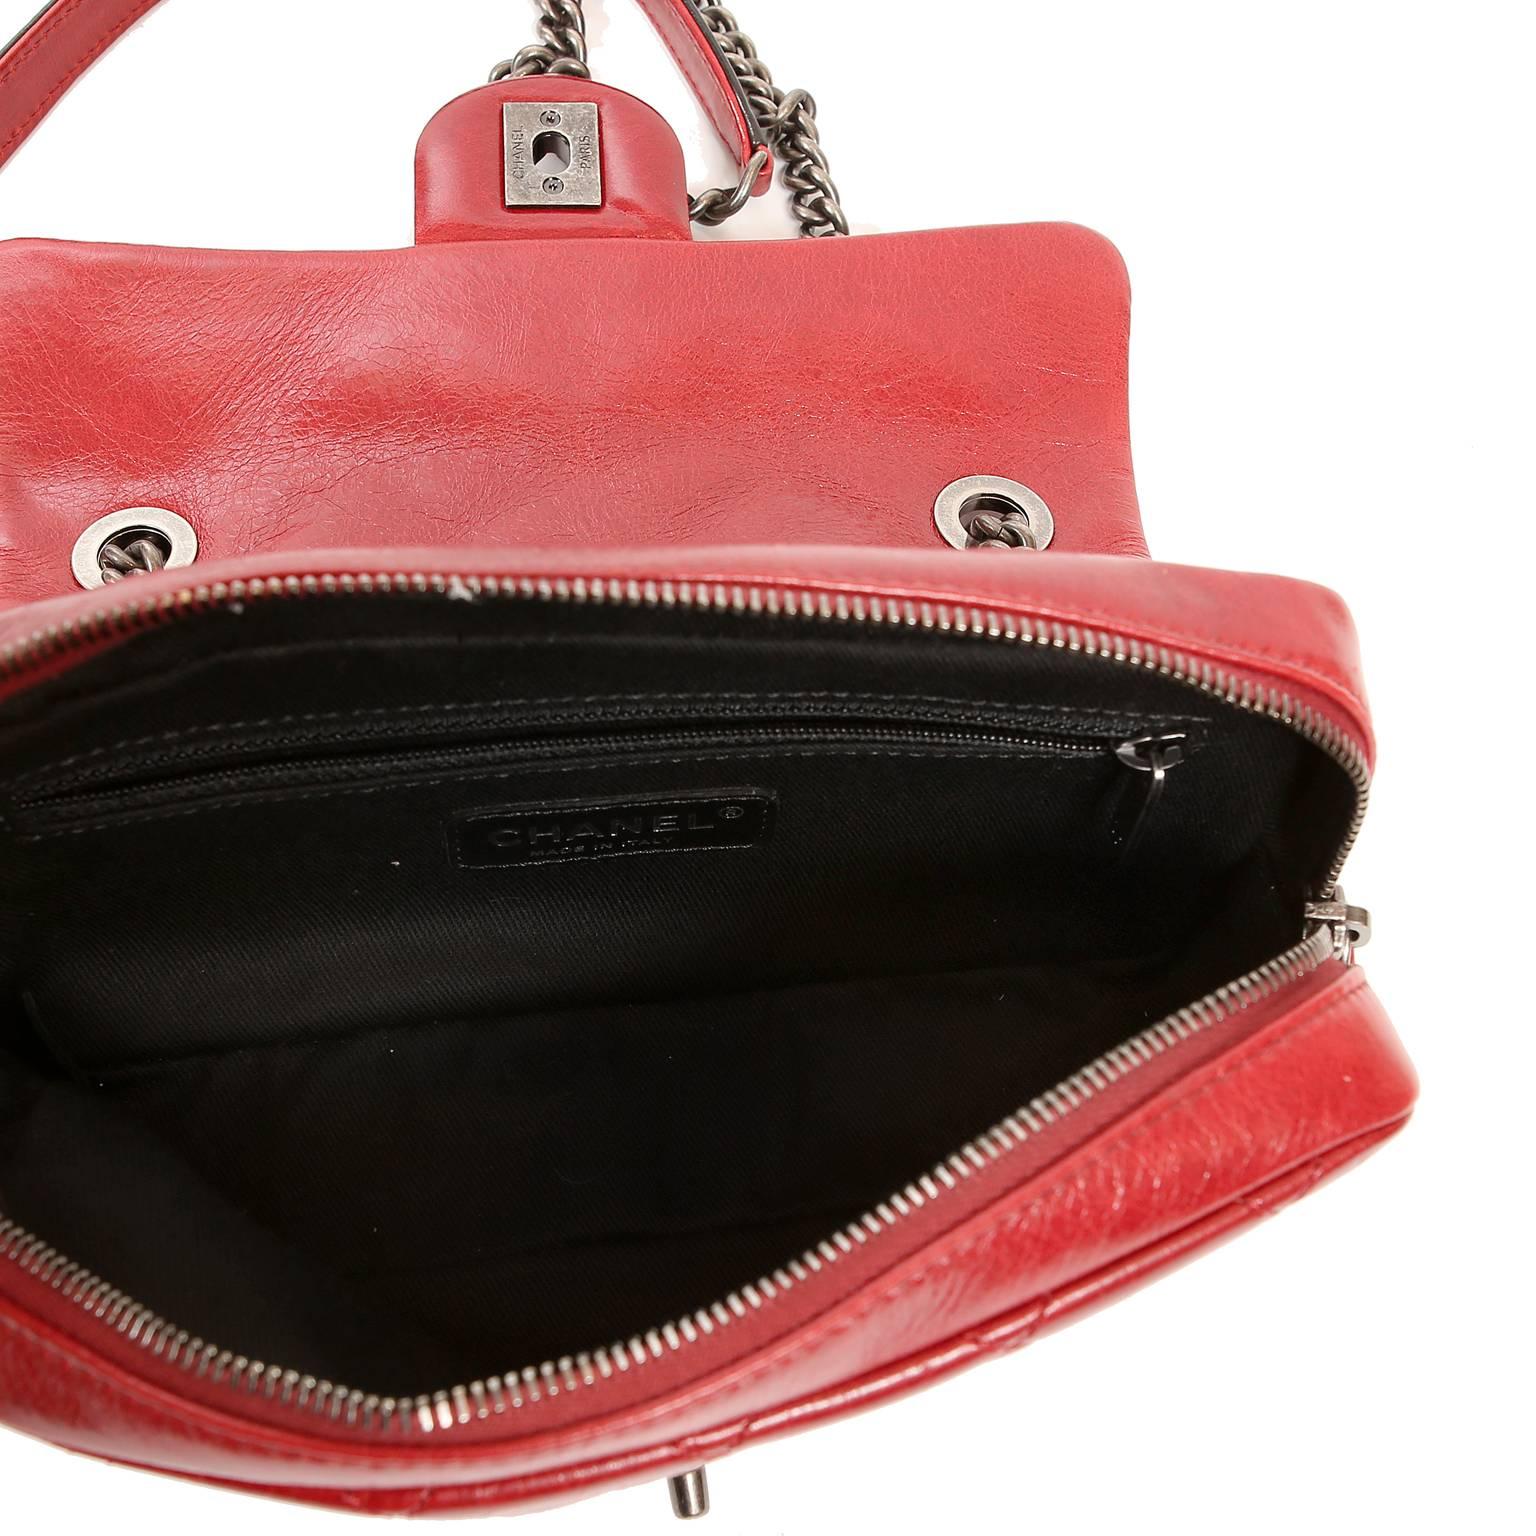 Women's Chanel Red Distressed Leather Crossbody Bag